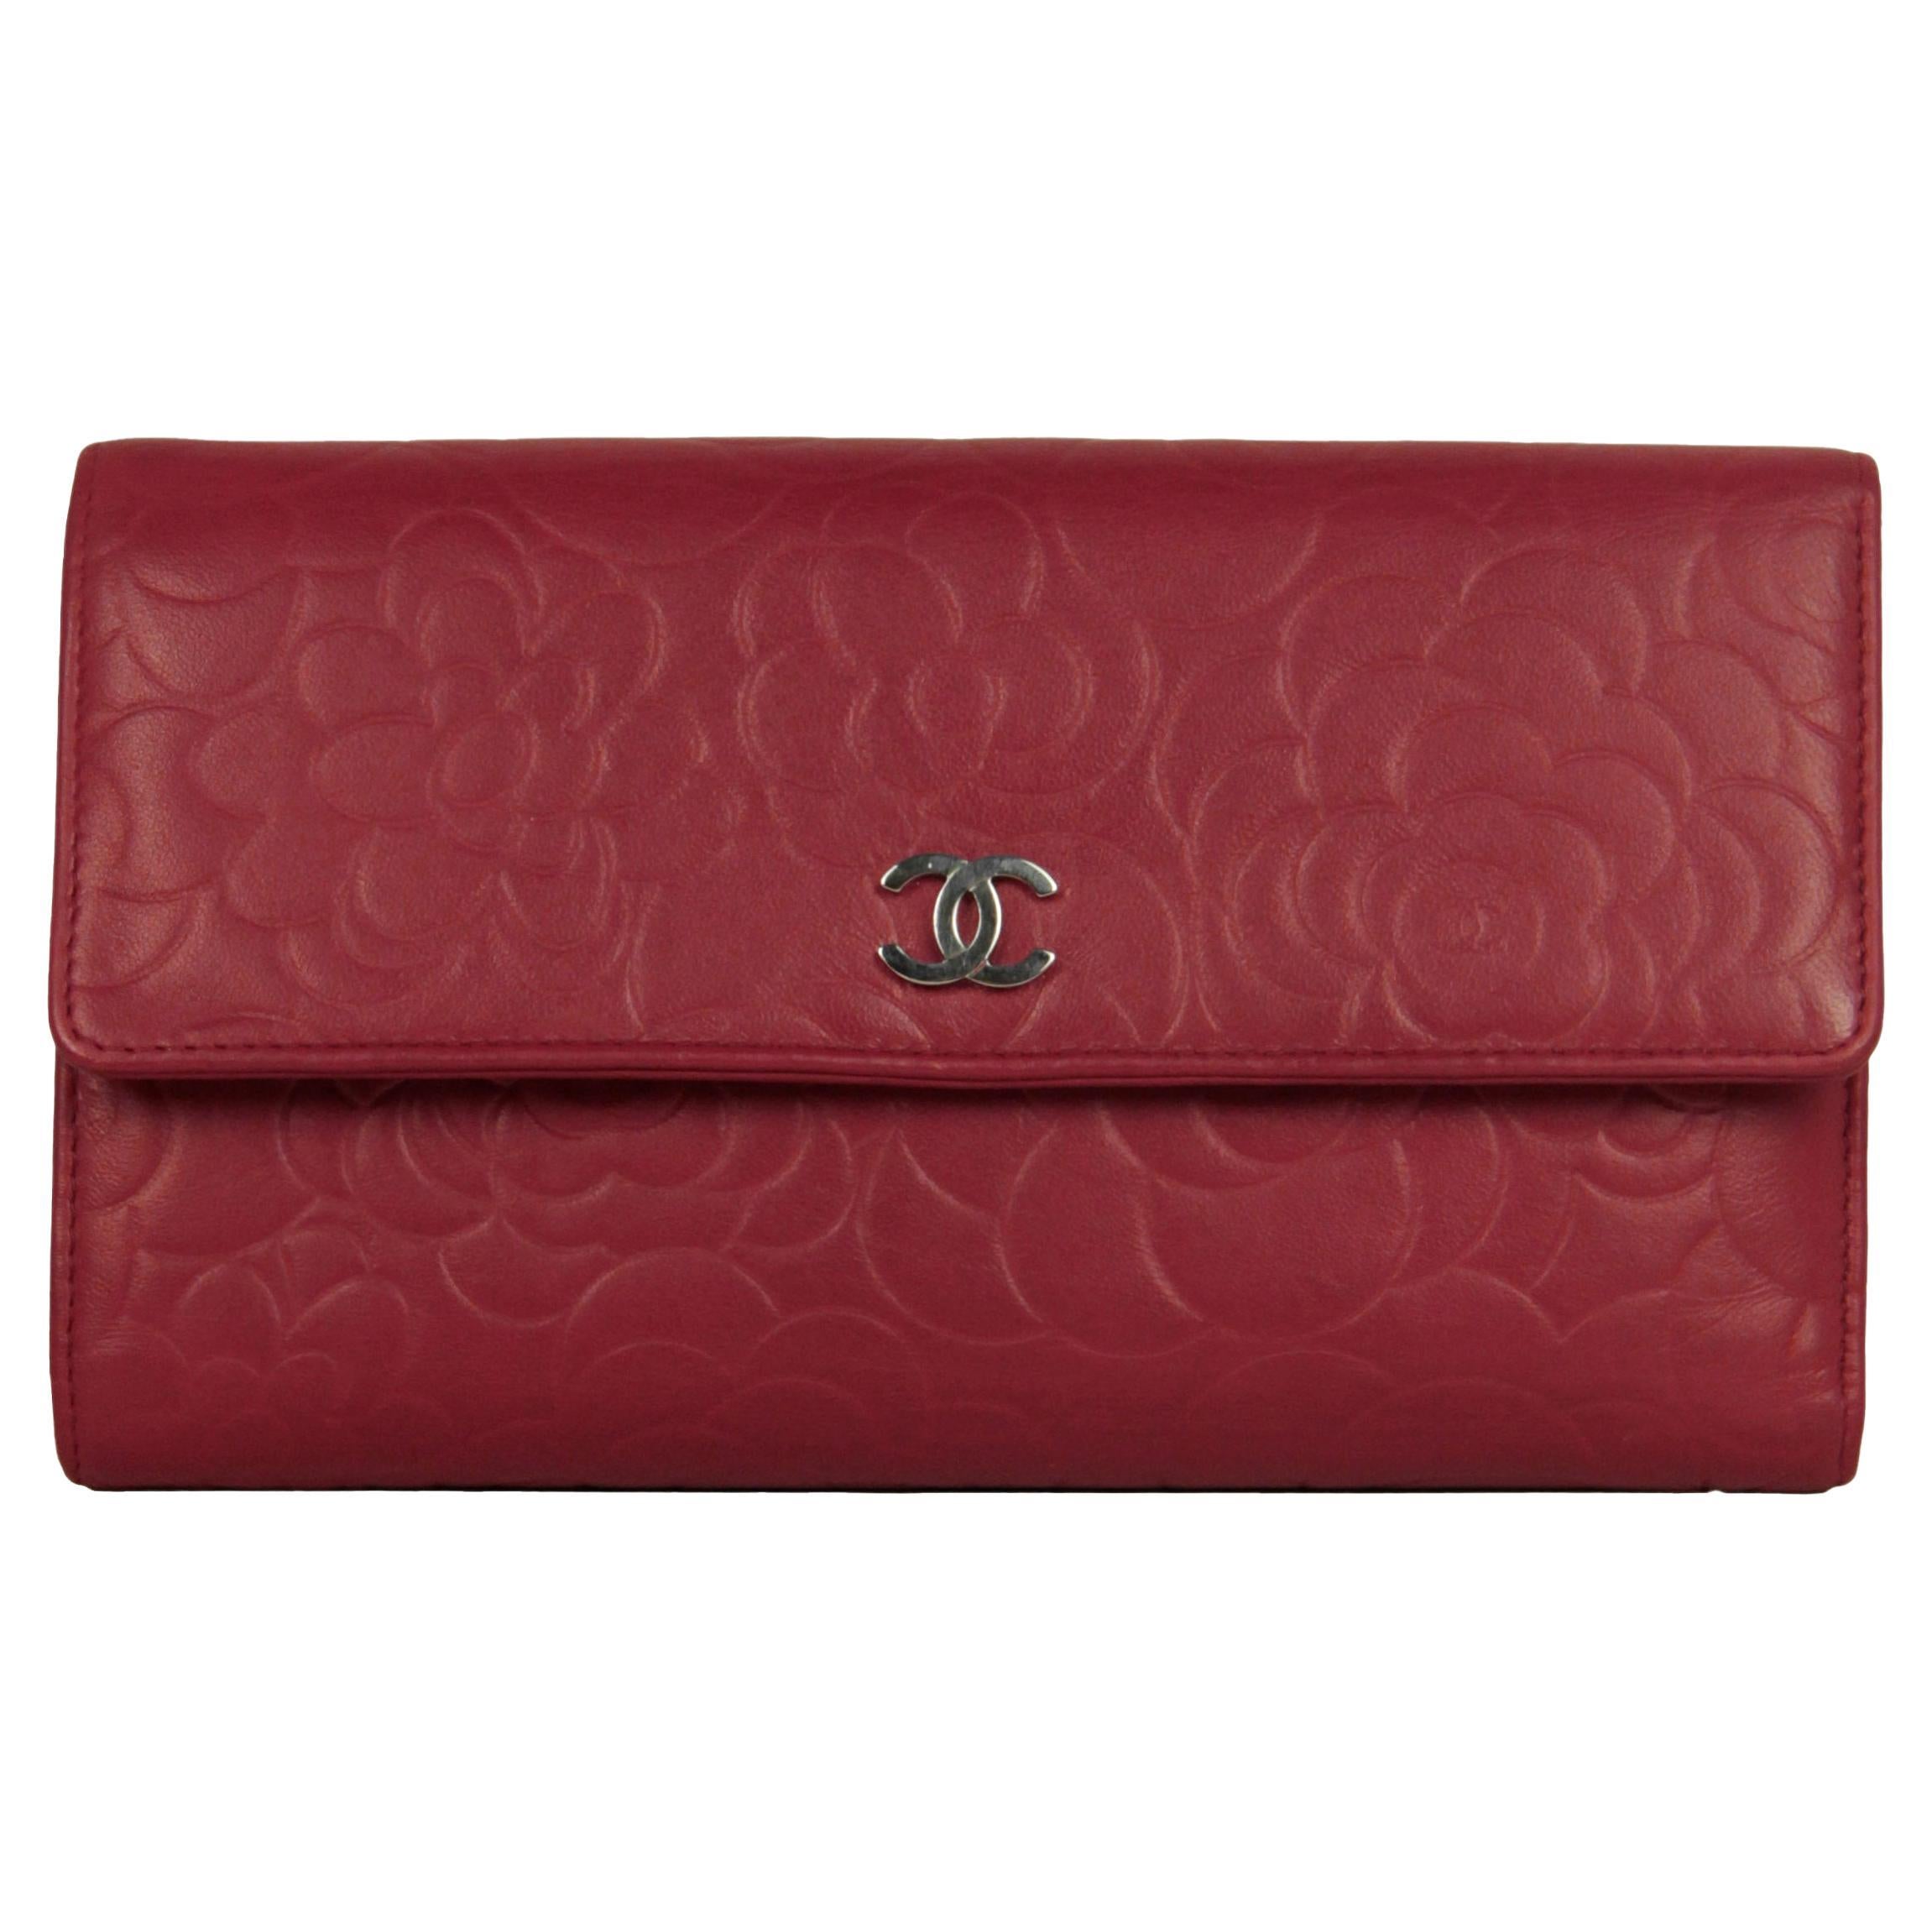 Chanel Red Leather Camelia Embossed Wallet